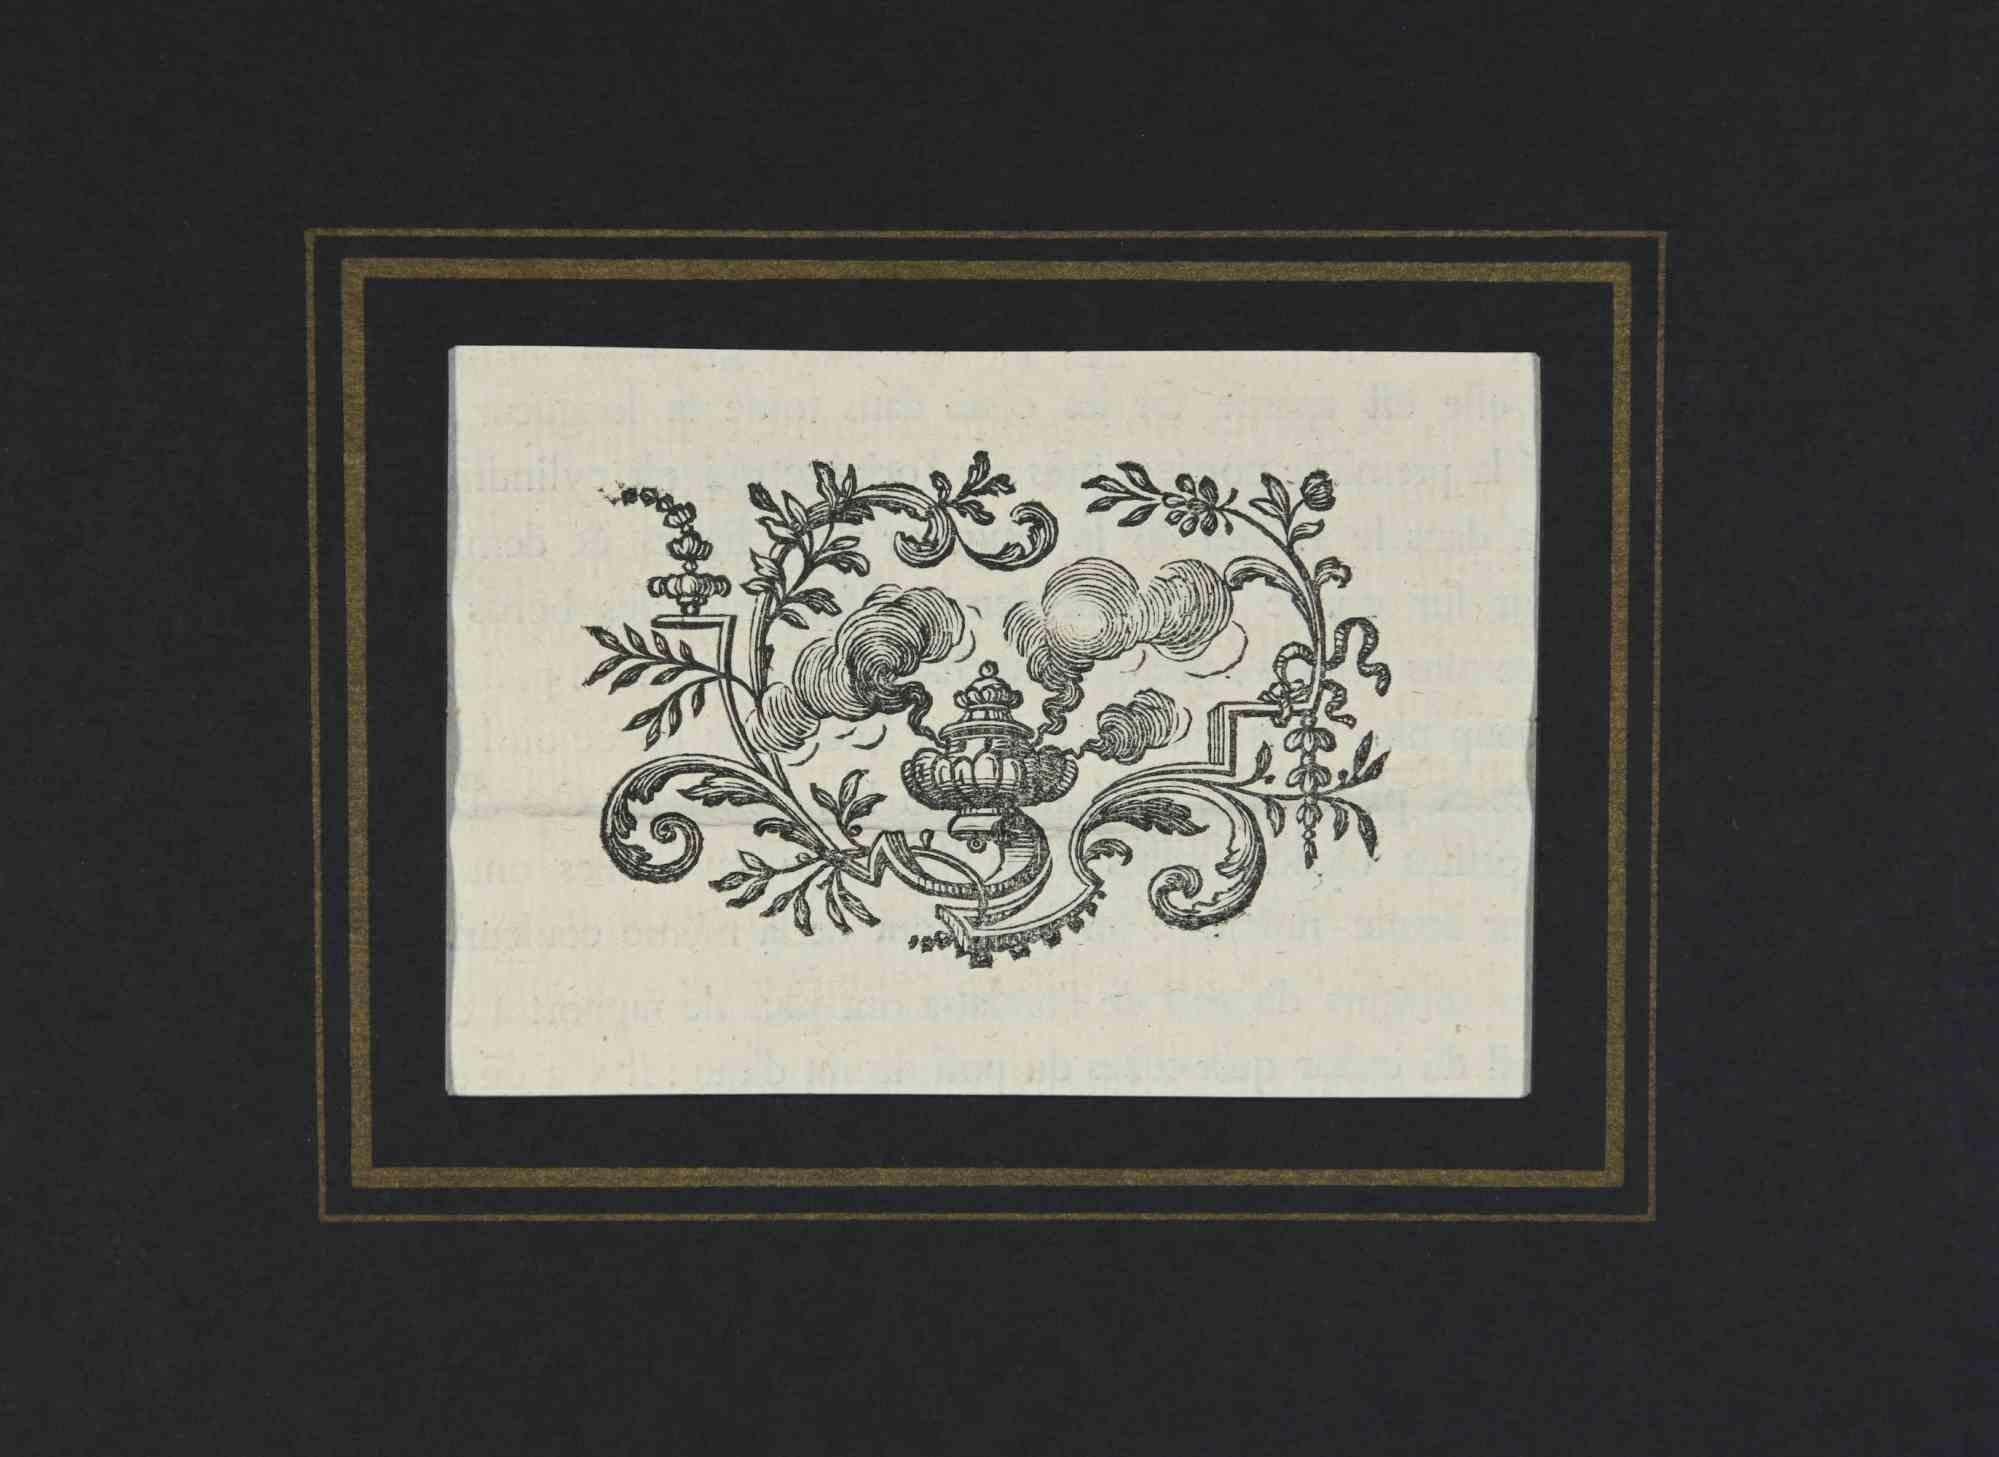 The Ornament is a woodcut print realized by Charles-Antoine Jombert in 1755.

Good conditions.

The print was realized for the anatomy study “JOMBERT, Charles-Antoine (1712-1784) - Méthode pour apprendre le dessein, ou l'on donne les regles